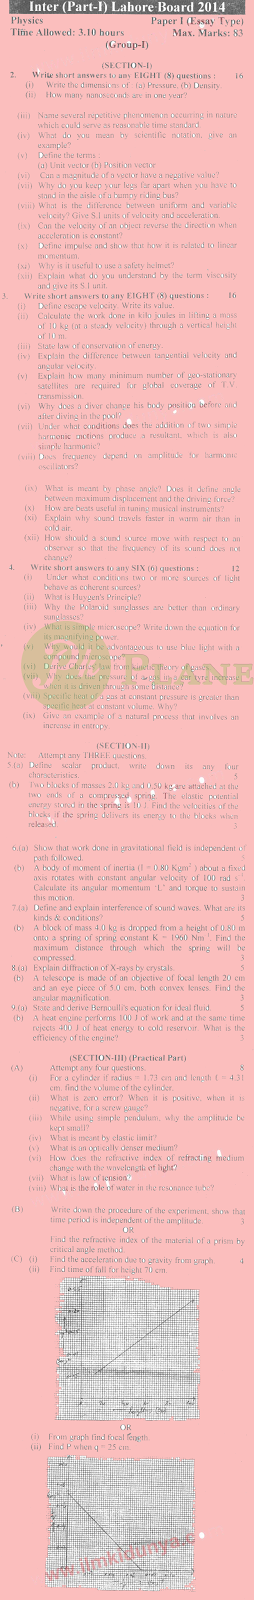 Past Papers of Physics Inter Part 1 Lahore Board 2014